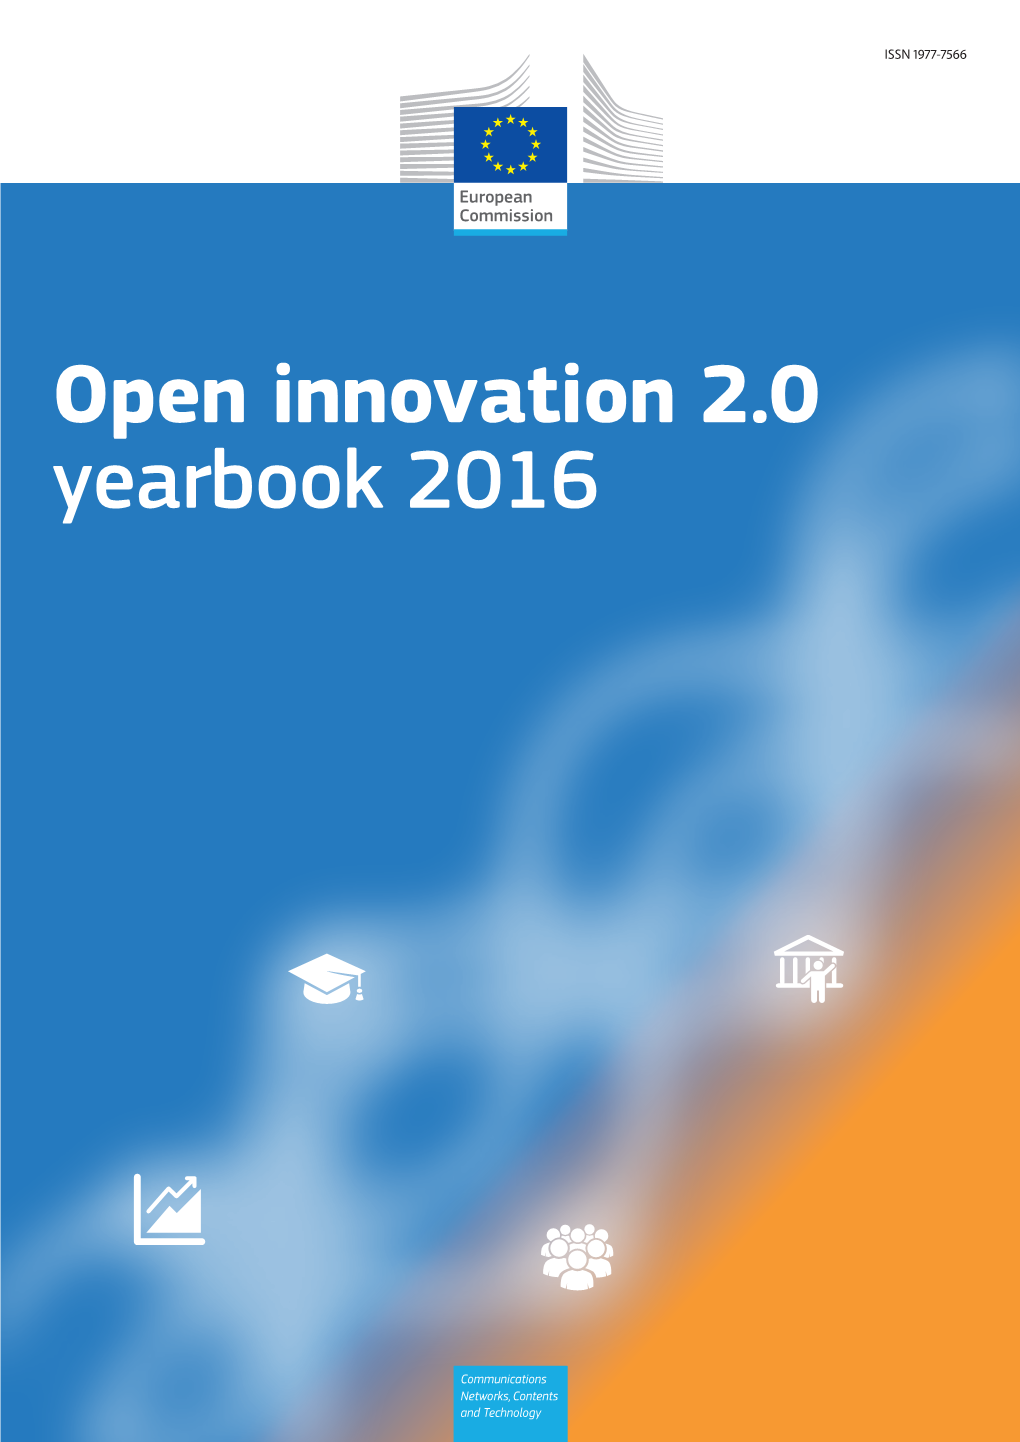 Open Innovation 2.0 Yearbook 2016